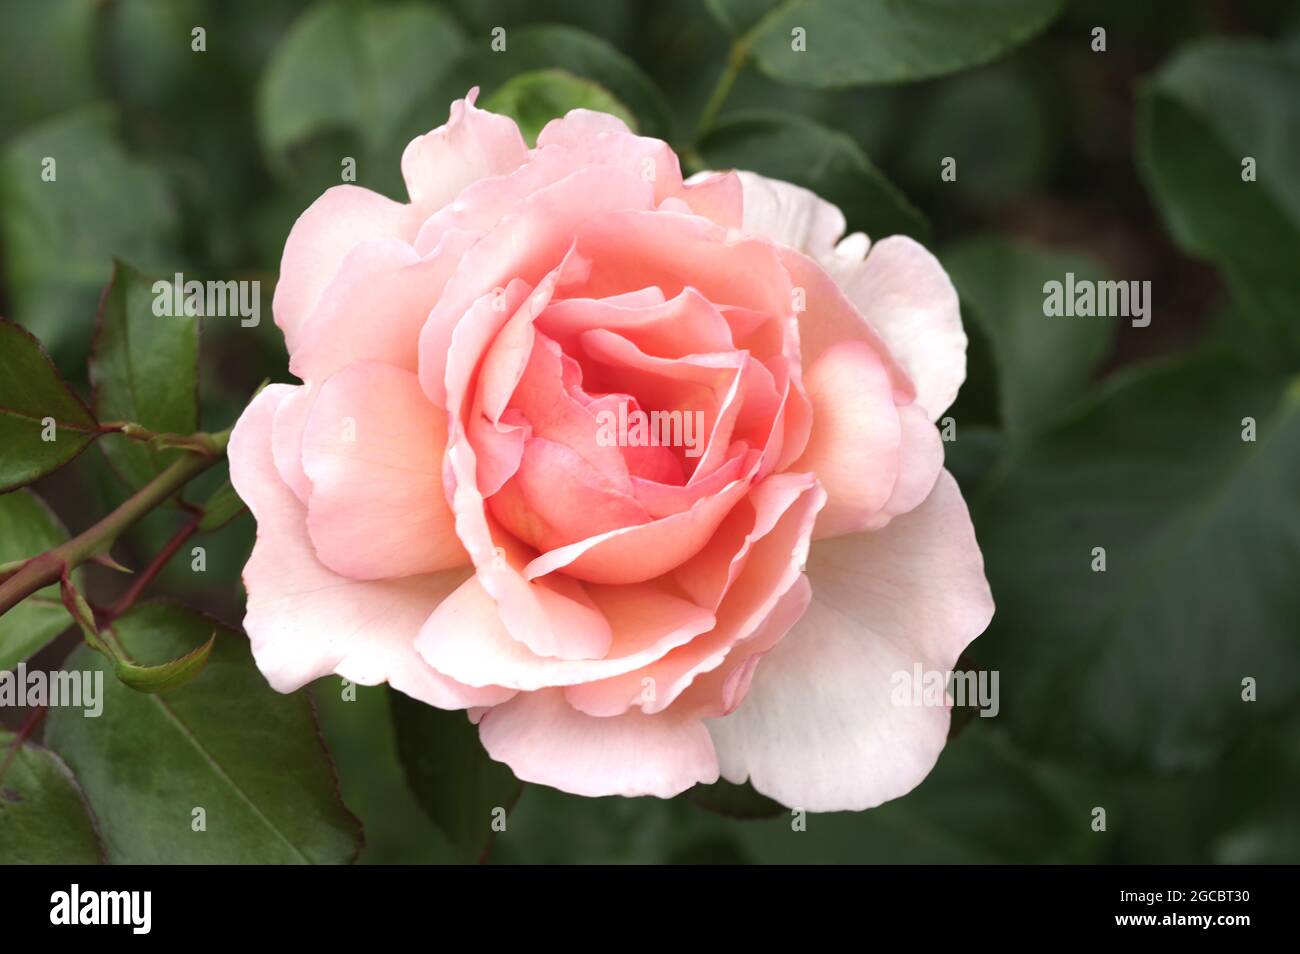 Beautiful rose flower in the garden. Rose flowers on the ...